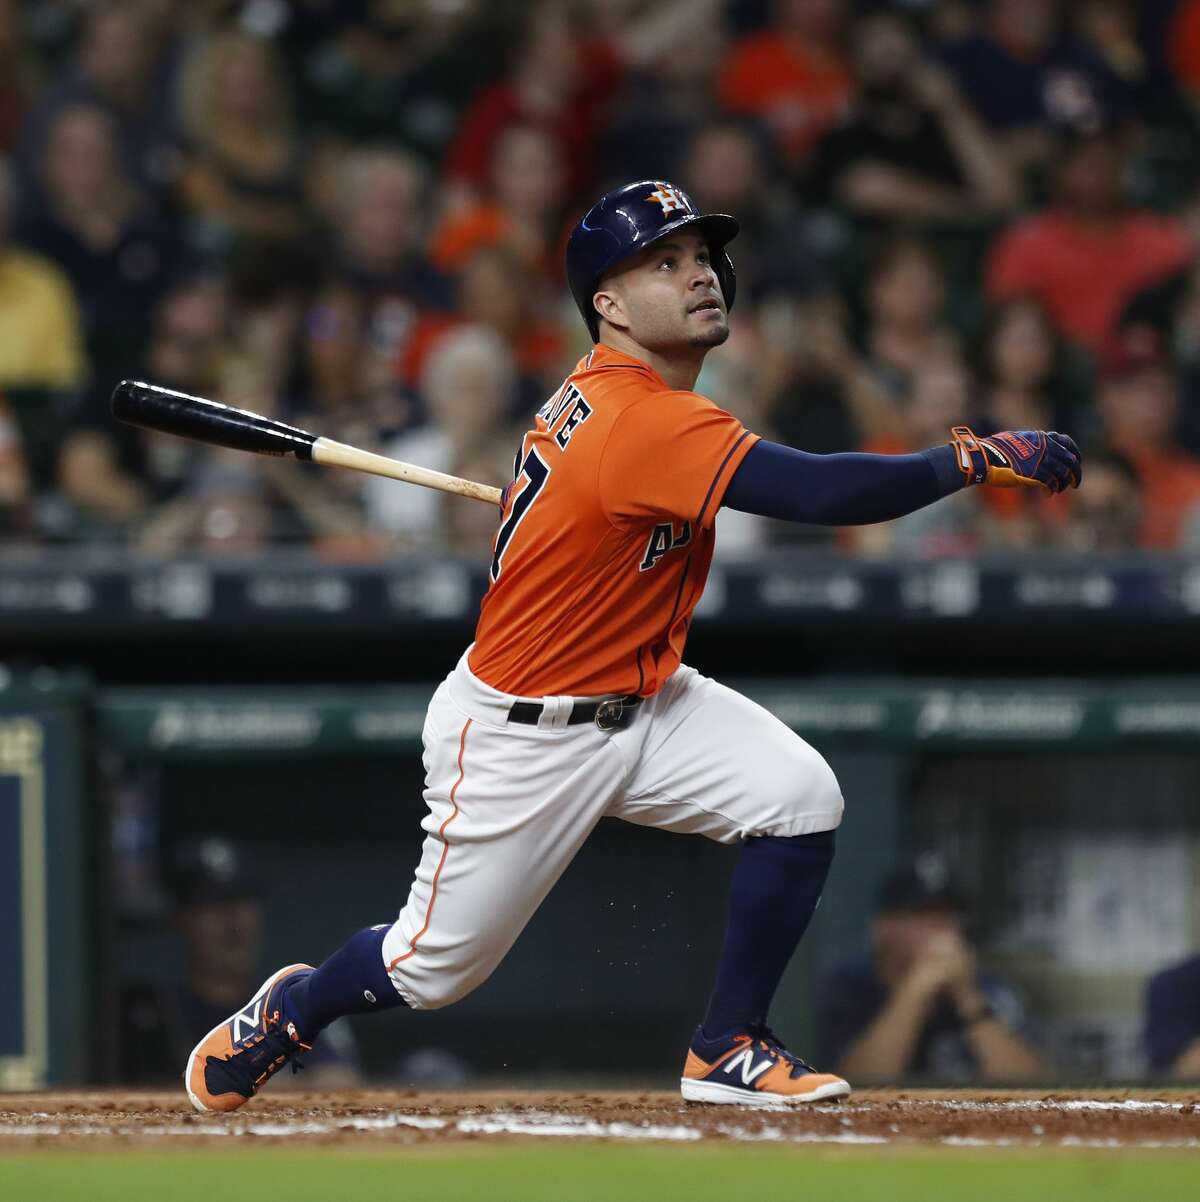 Houston Astros designated hitter Jose Altuve (27) flies out during the second inning of an MLB baseball game at Minute Maid Park, Friday, Sept. 15, 2017, in Houston. ( Karen Warren / Houston Chronicle )